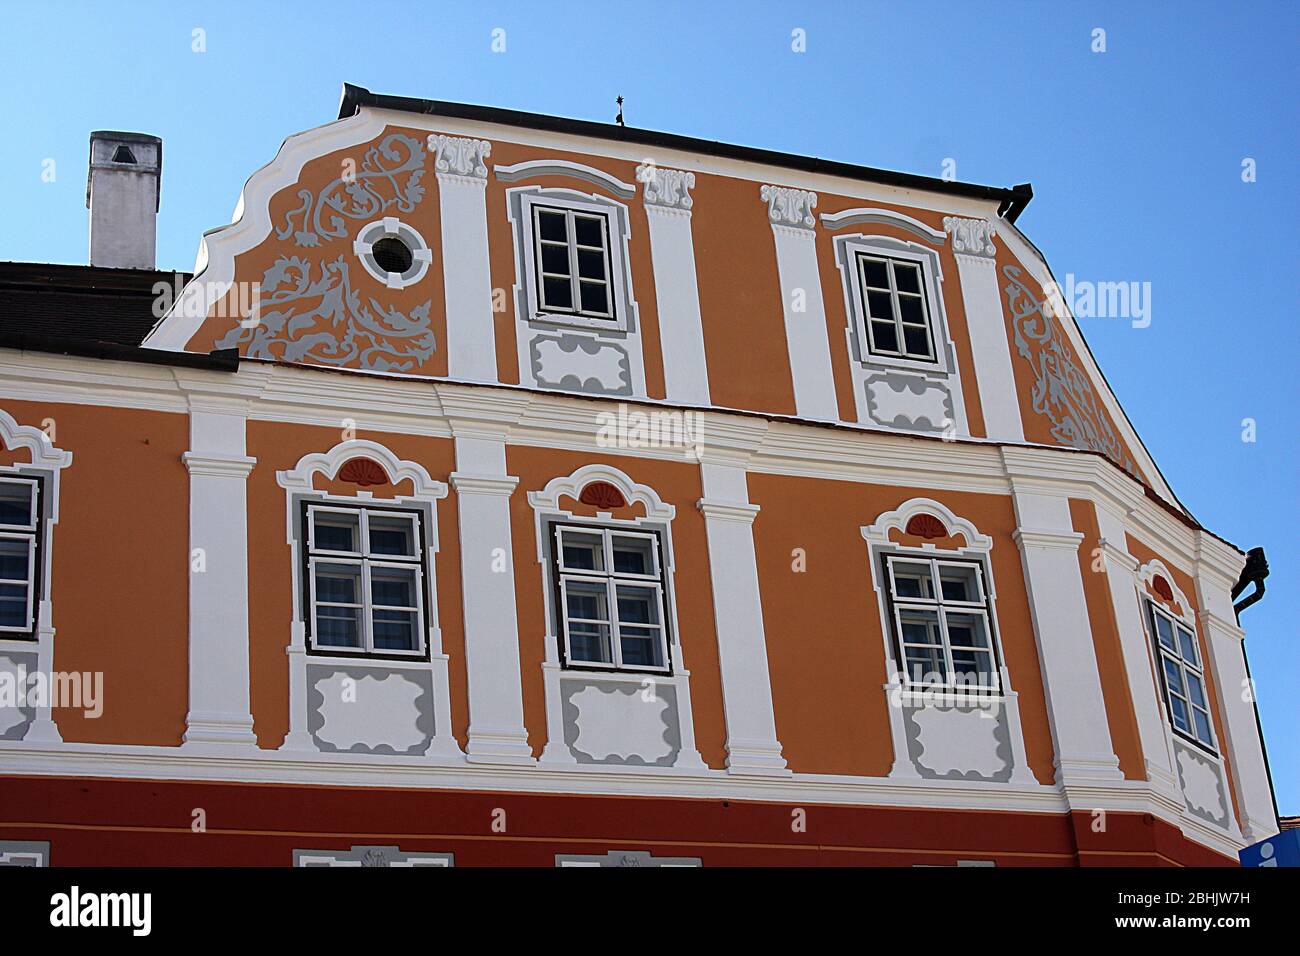 Sibiu, Romania.  House of Luxembourg  (Casa Luxemburg) Hotel, in a medieval era building with an elaborately decorated facade from the 17th century. Stock Photo